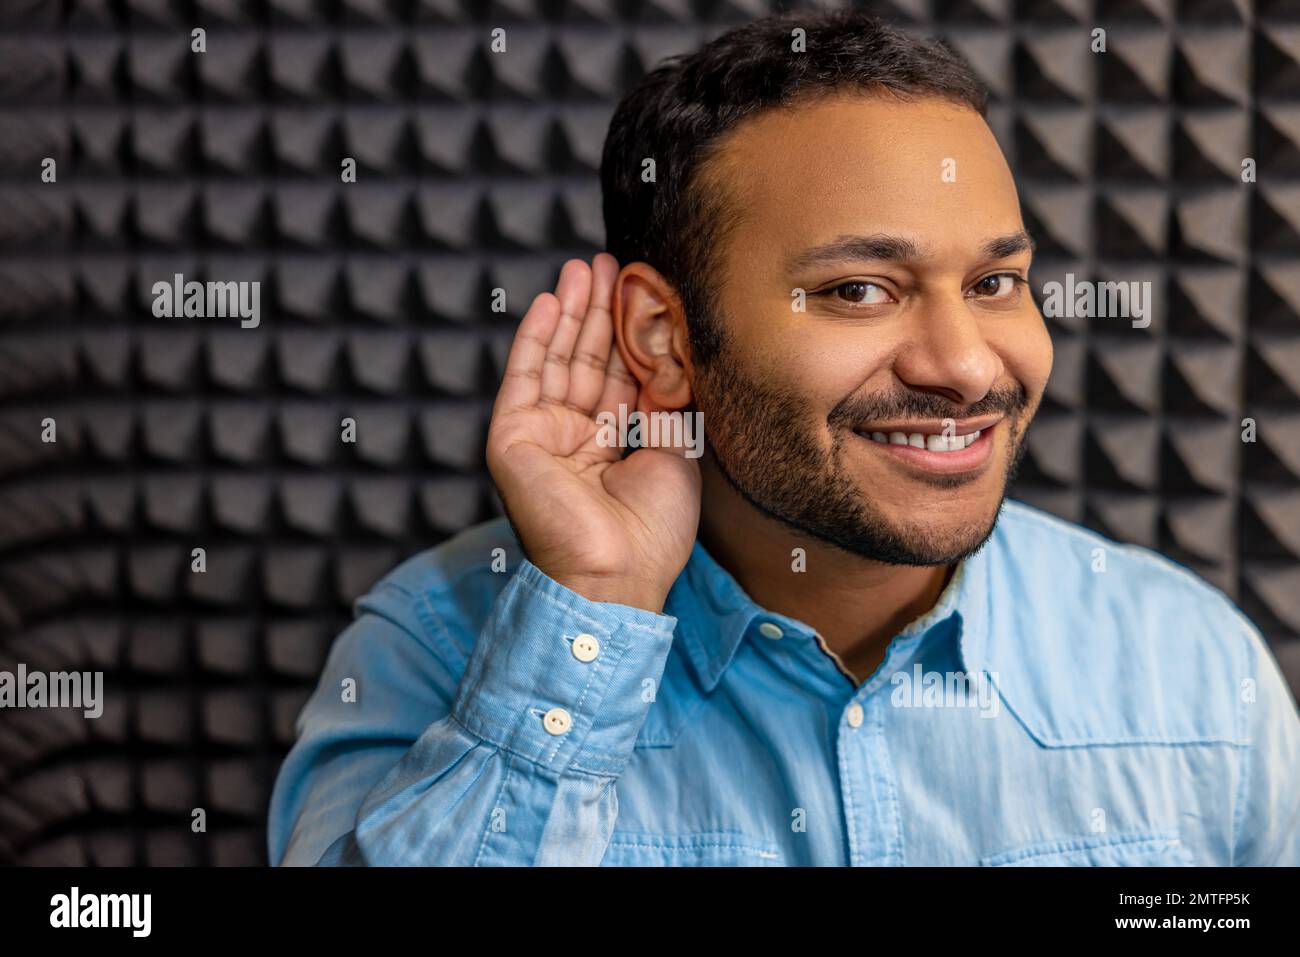 Smiling young man having a hearing checkup and looking contented Stock Photo